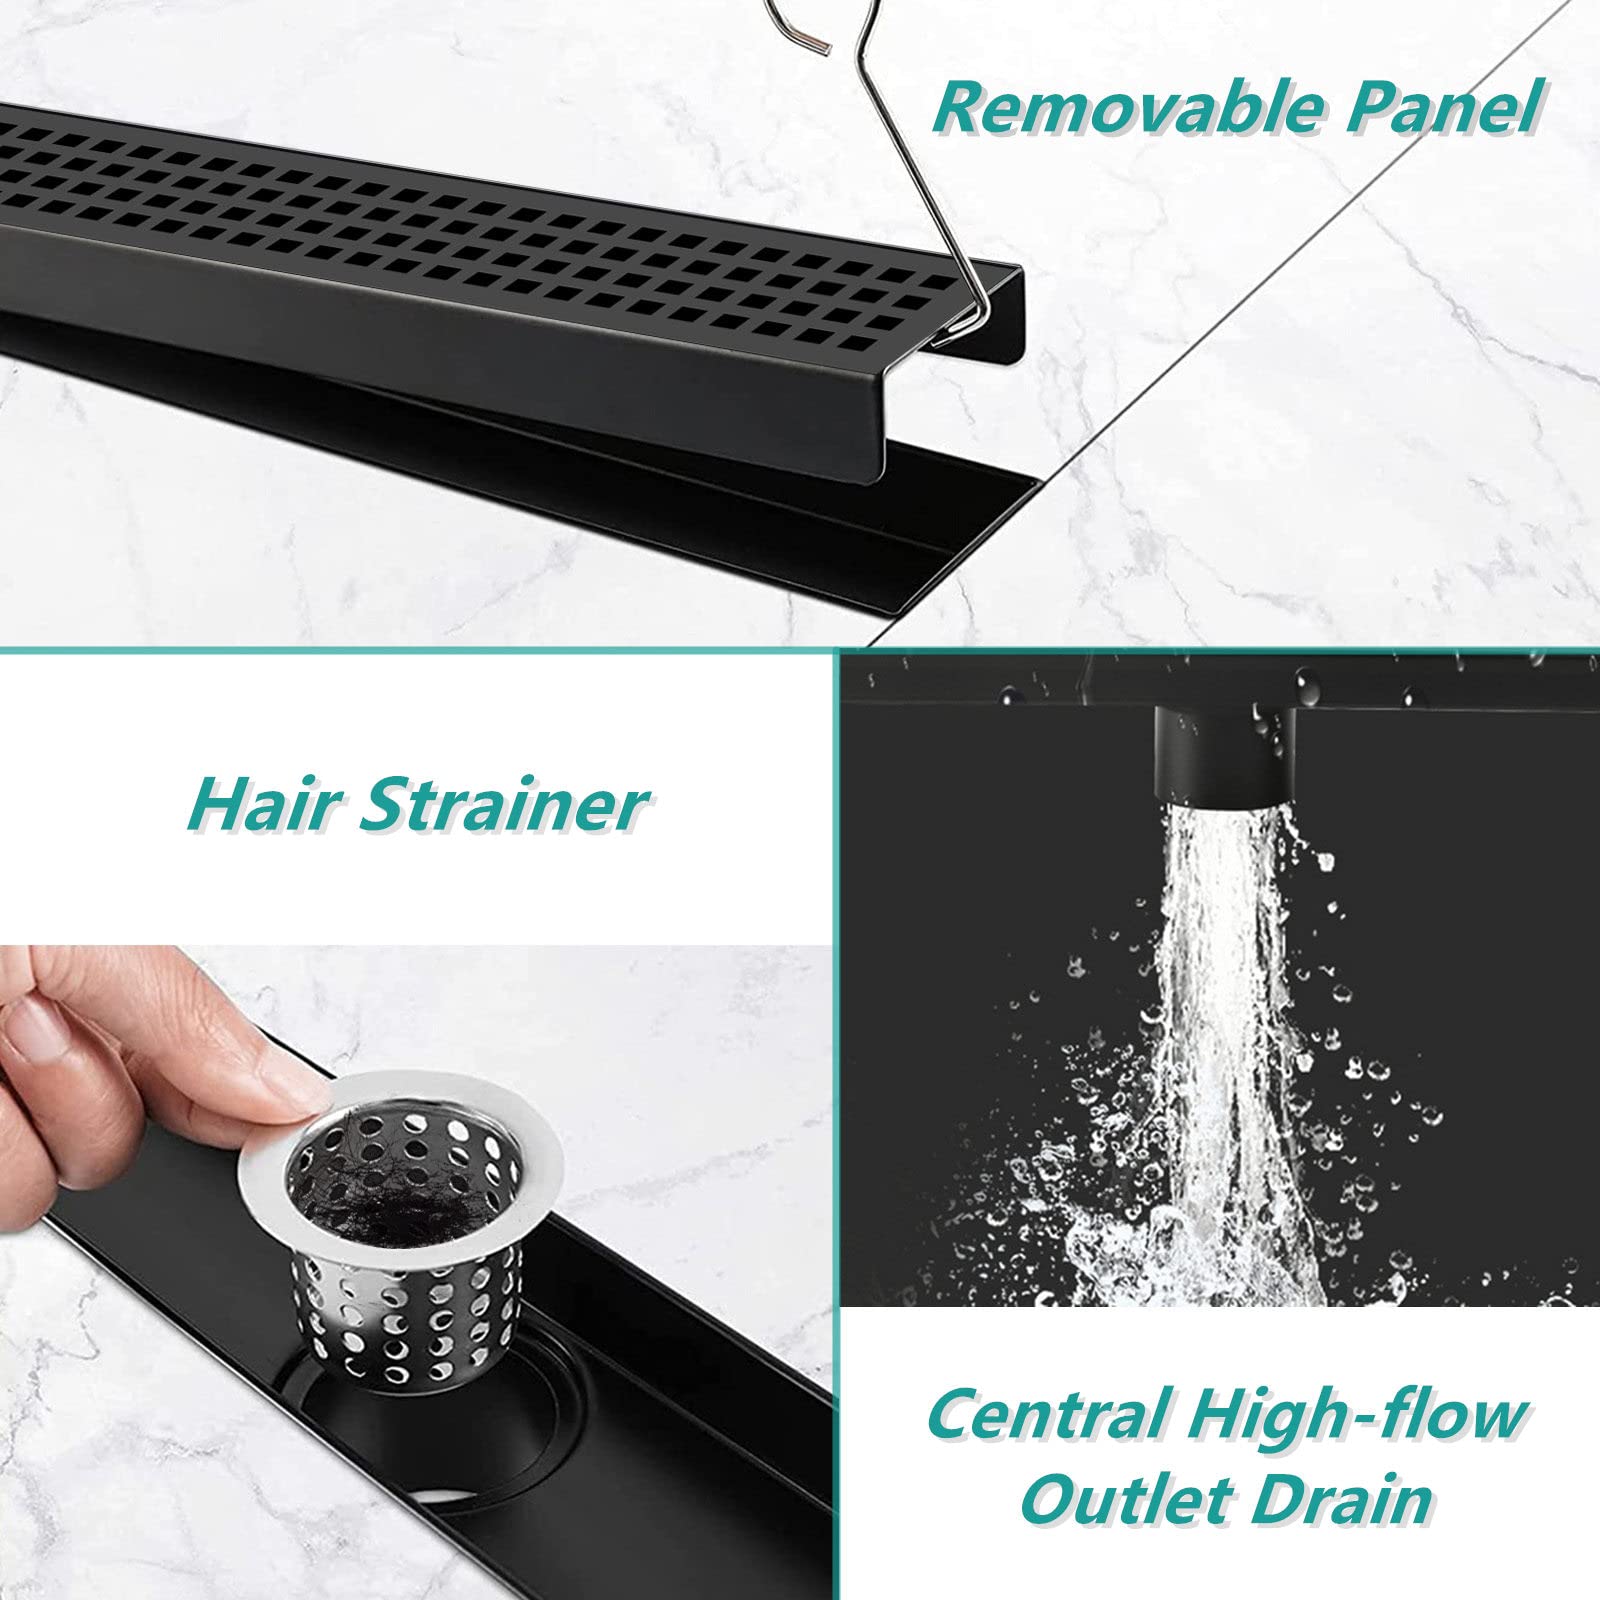 BARONAGE Linear Shower Drain 24 Inch with Removable Square Hole Pattern Cover Grate, 304 Stainless Steel Black Shower Floor Drain Watermark & CUPC Certified Include Accessories